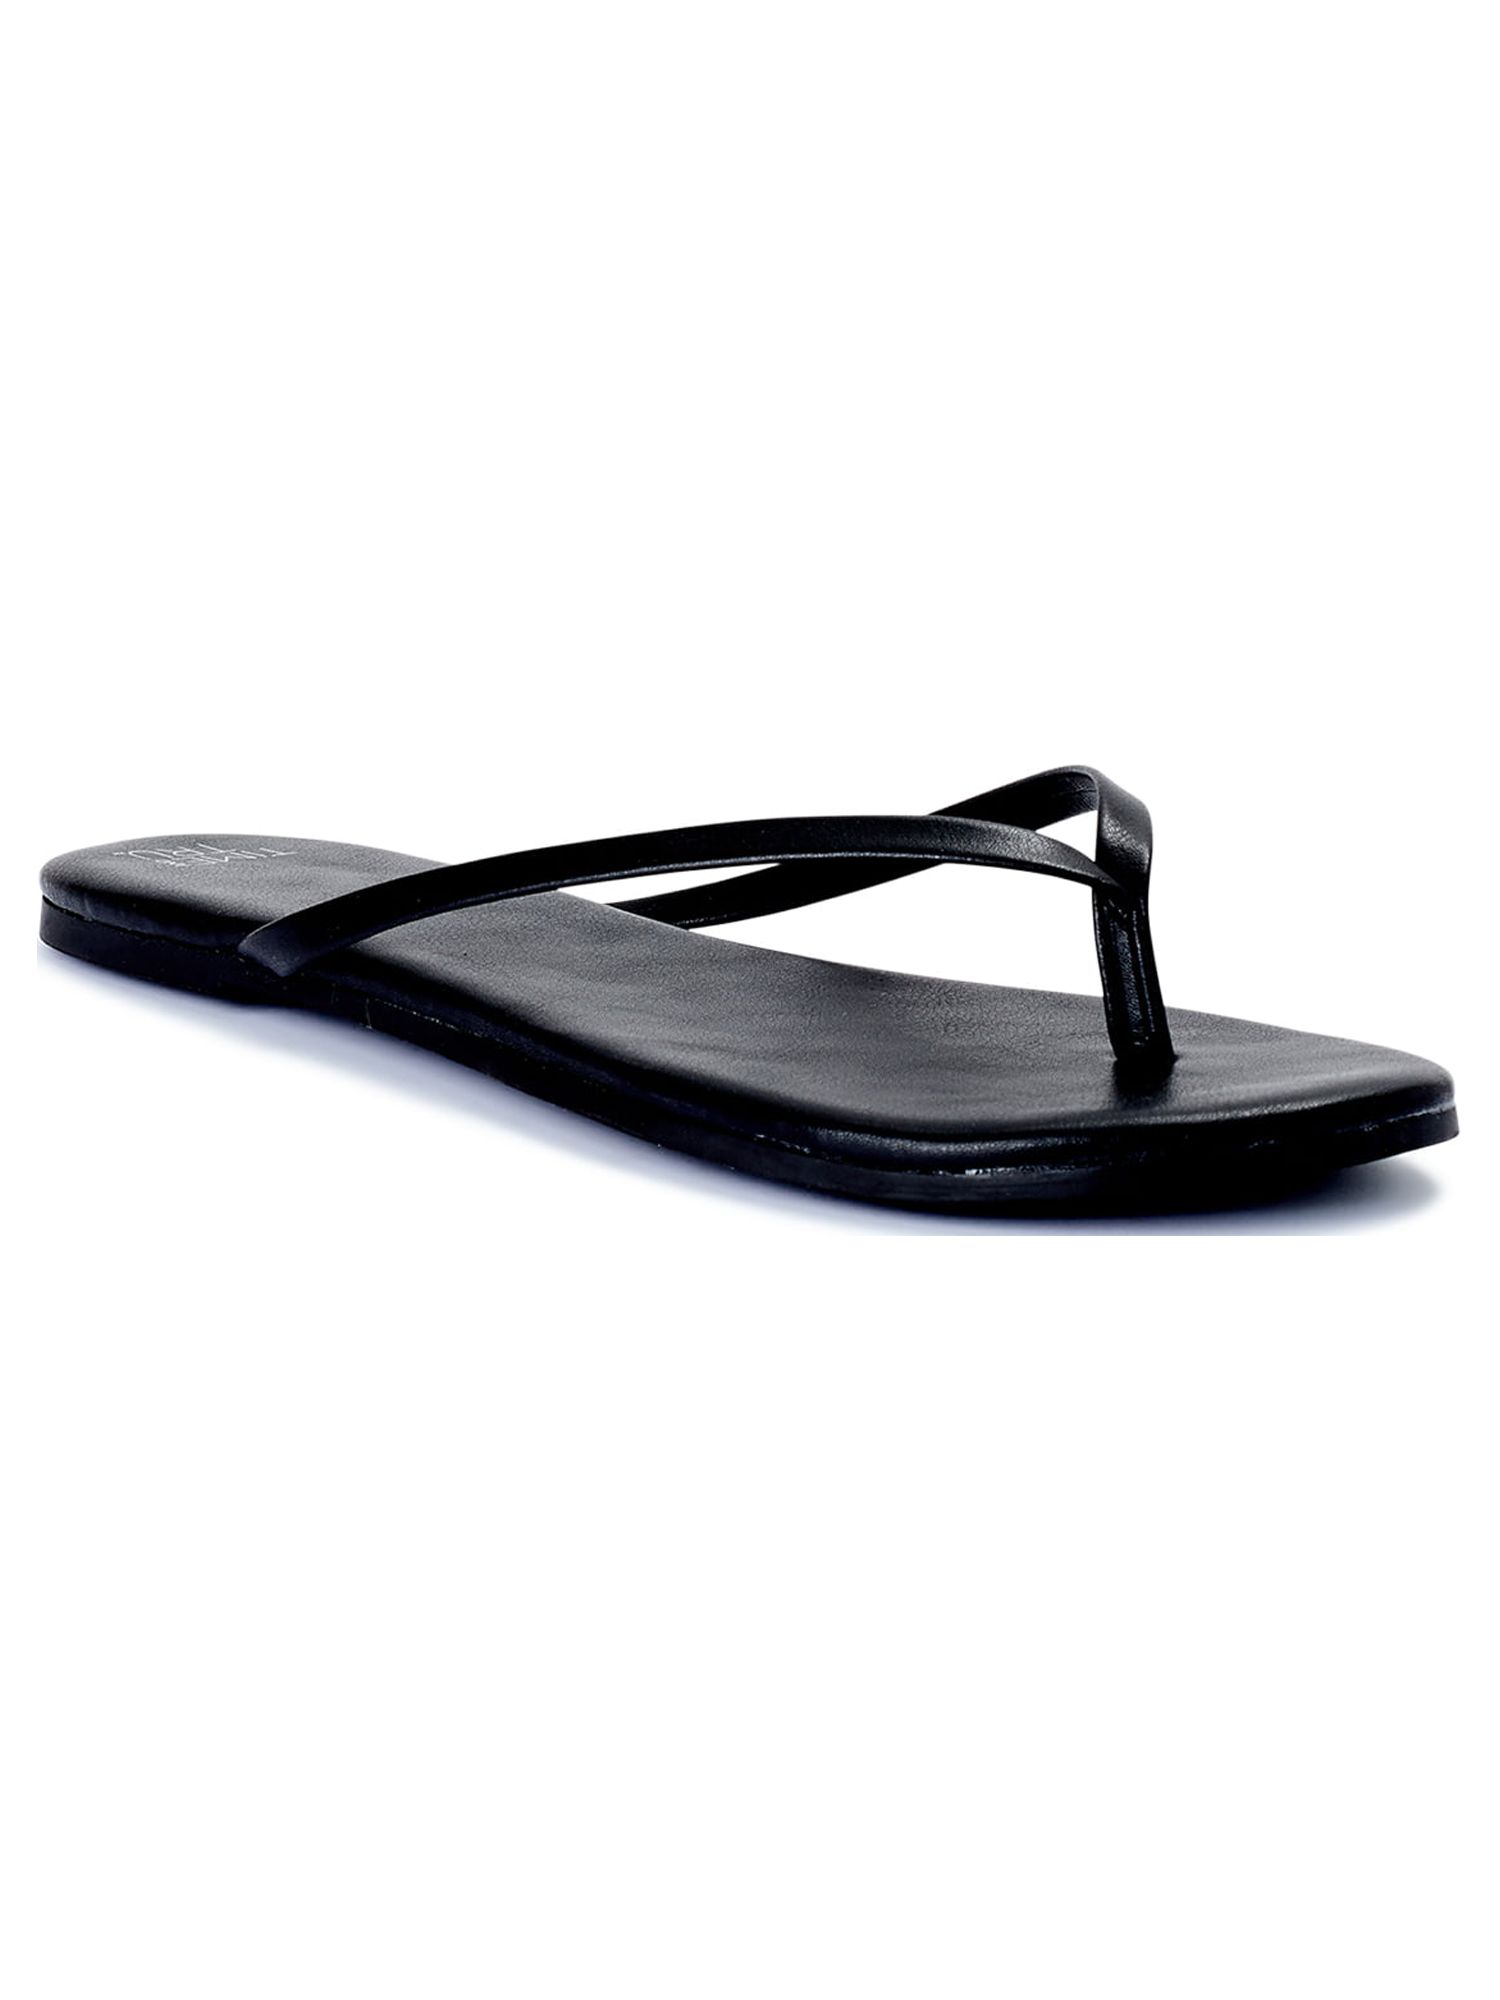 Time and Tru Women's Barely There Thong Sandals, Wide Width Available - image 3 of 7